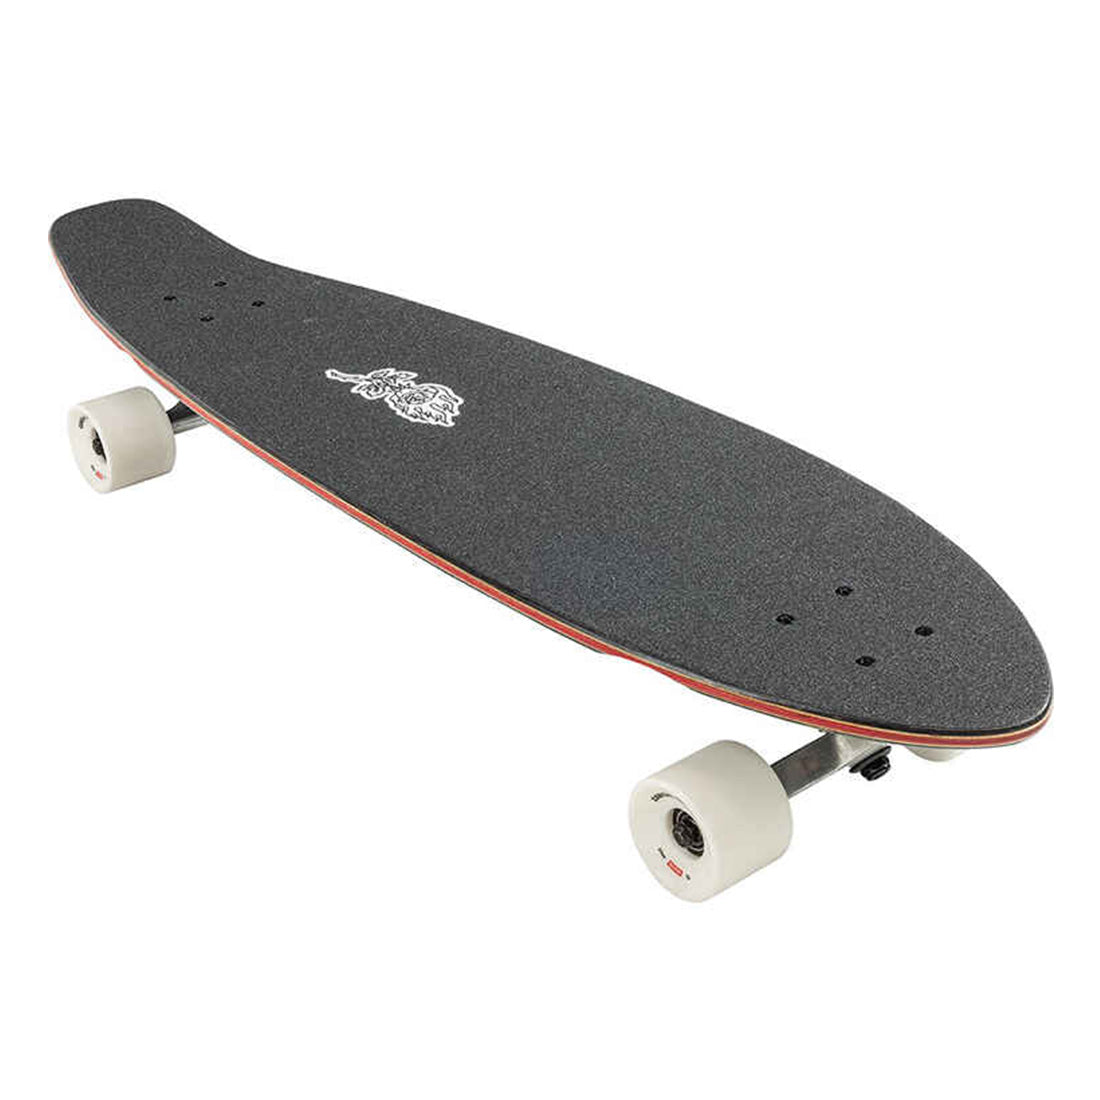 Globe The All-Time 35 Complete - Black Rose Skateboard Completes Longboards